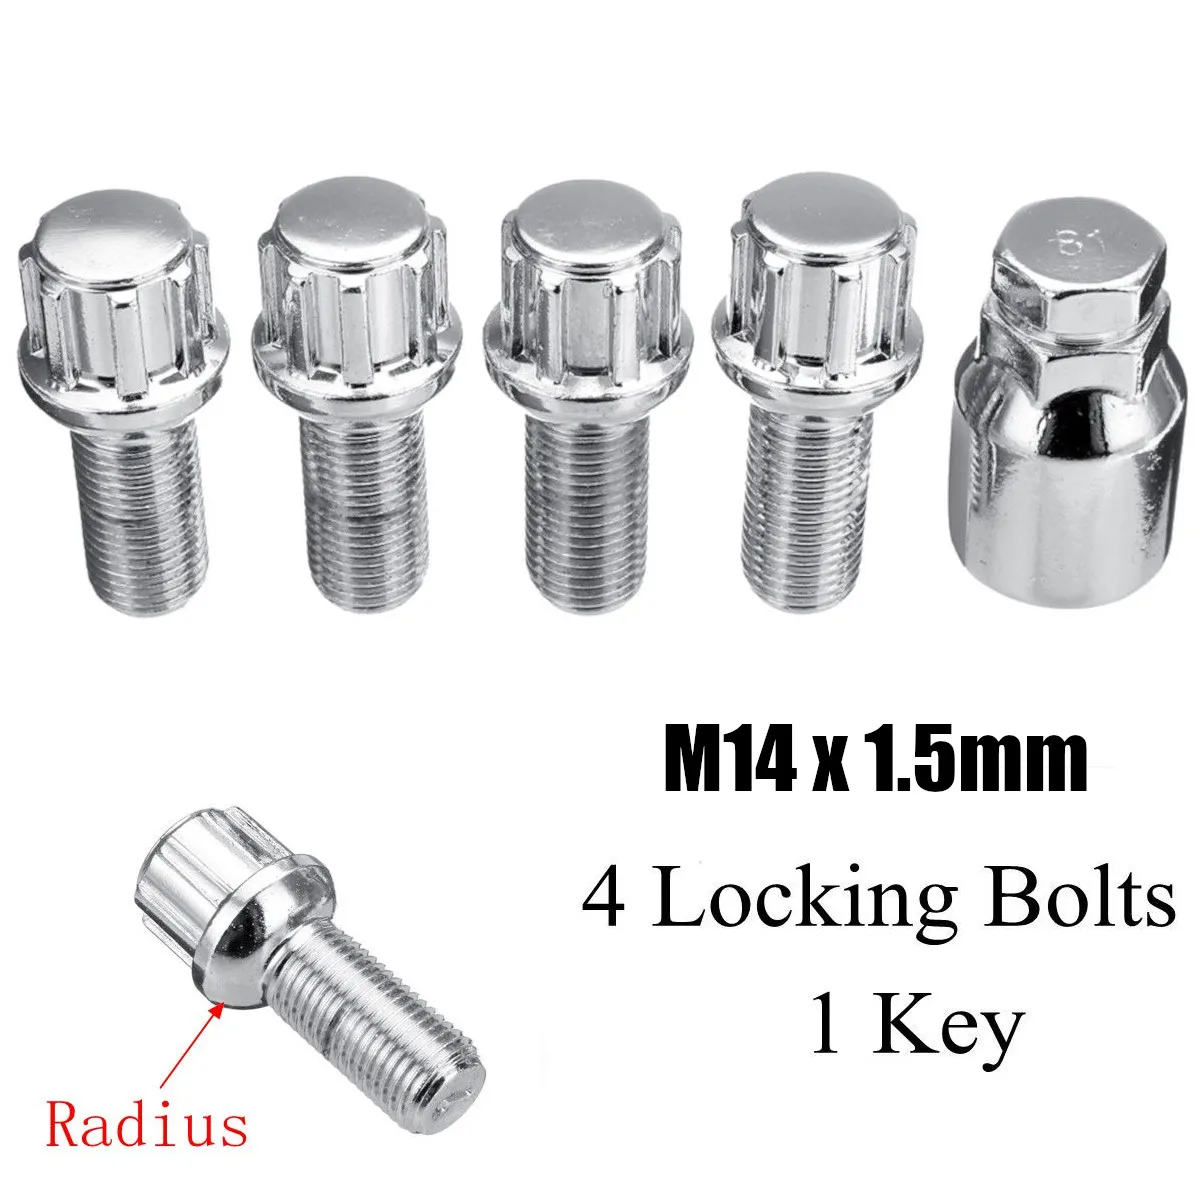 Ping.Feng 10pcs M14x1.5 40mm Car Wheel Lock Bolts Screw Security Lug Nuts for Audi A3 A4 S3 A6 for VW Golf/Seat 19mm Hex Screws 